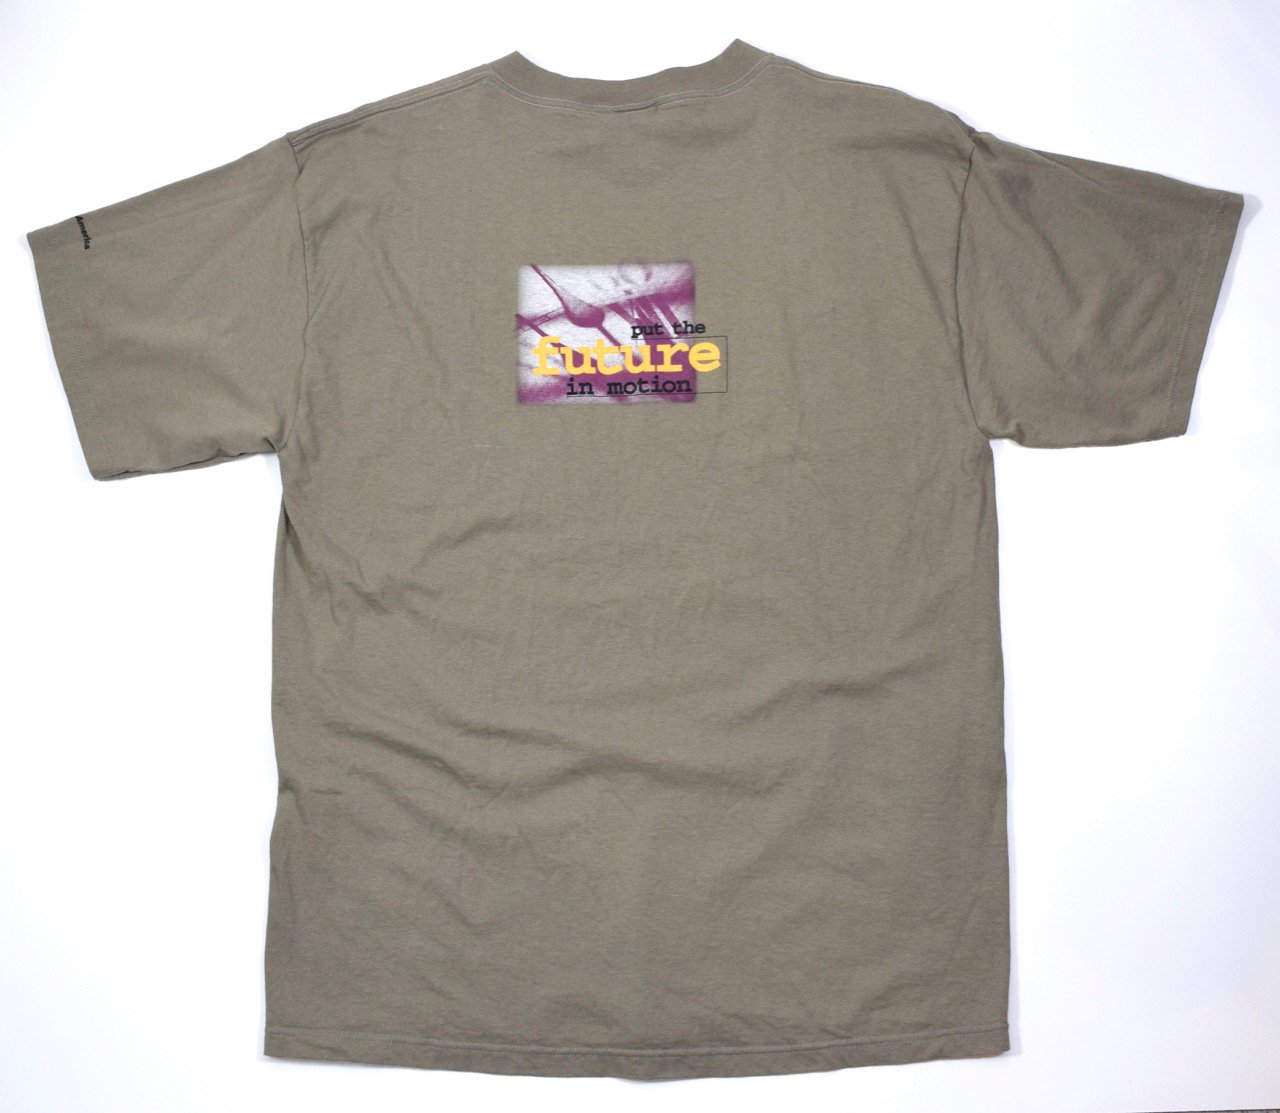 DEAD STOCK 90s Bank of America Tee [put the future in motion]